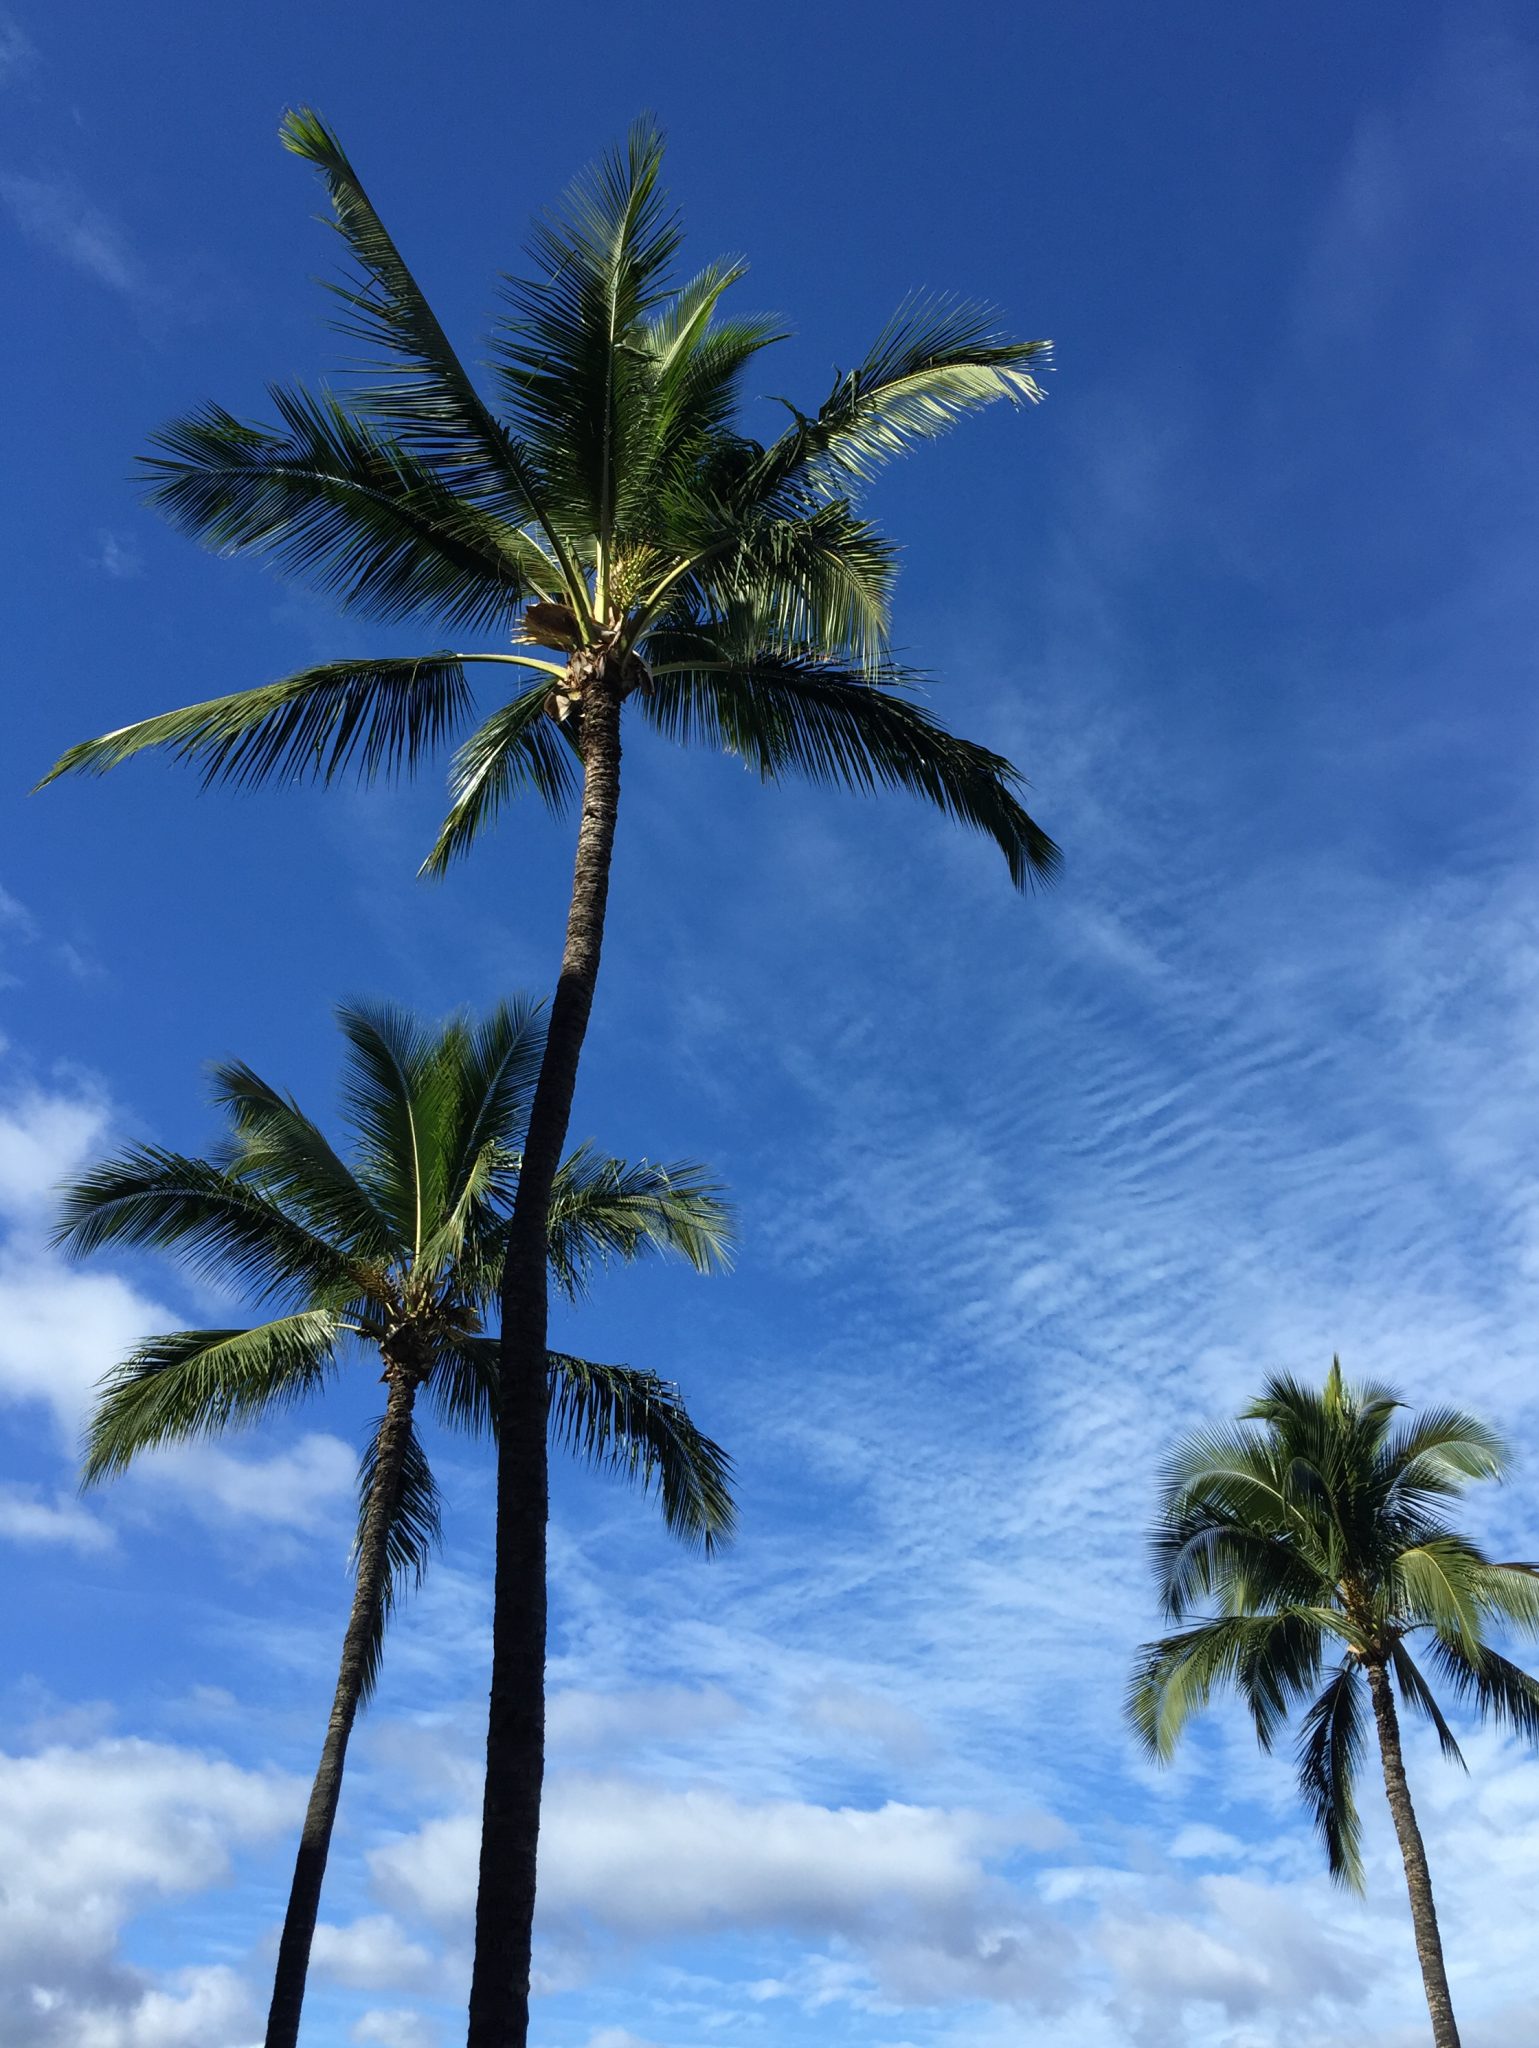 Palm Trees And Clouds Against A Blue Sky